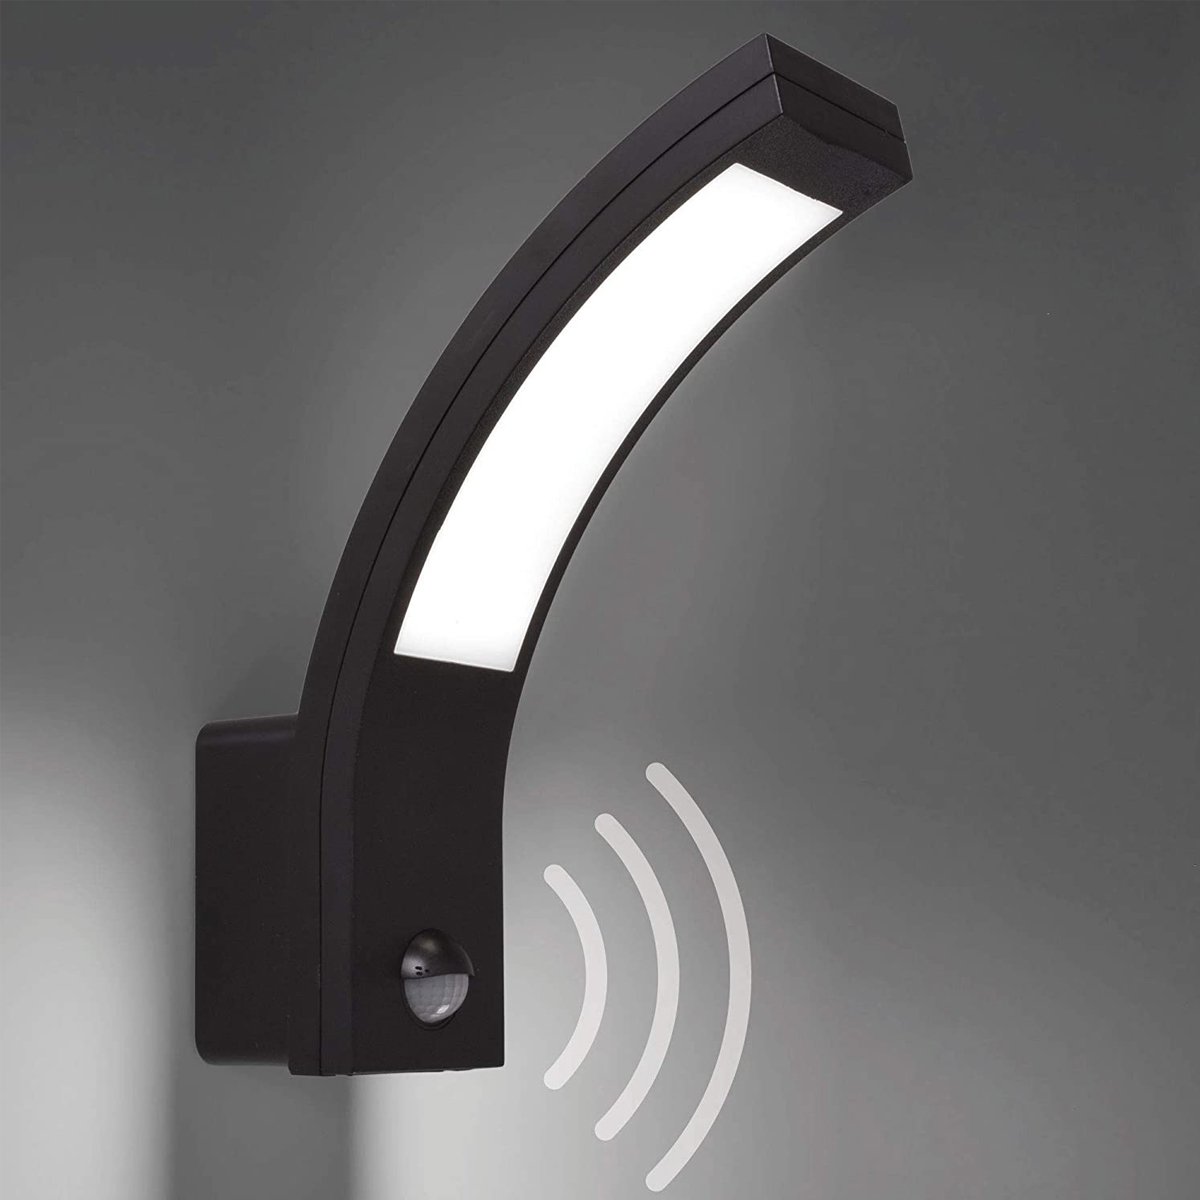 Paris has been designed for use outdoors. It features IP code IP54, which means that the light is protected from dirt and moisture. This LED outdoor wall light is simple and modern in design to create a minimalist light. The LEDs are housed behind an opal white panel made of polycarbonate. Built in motion sensor.